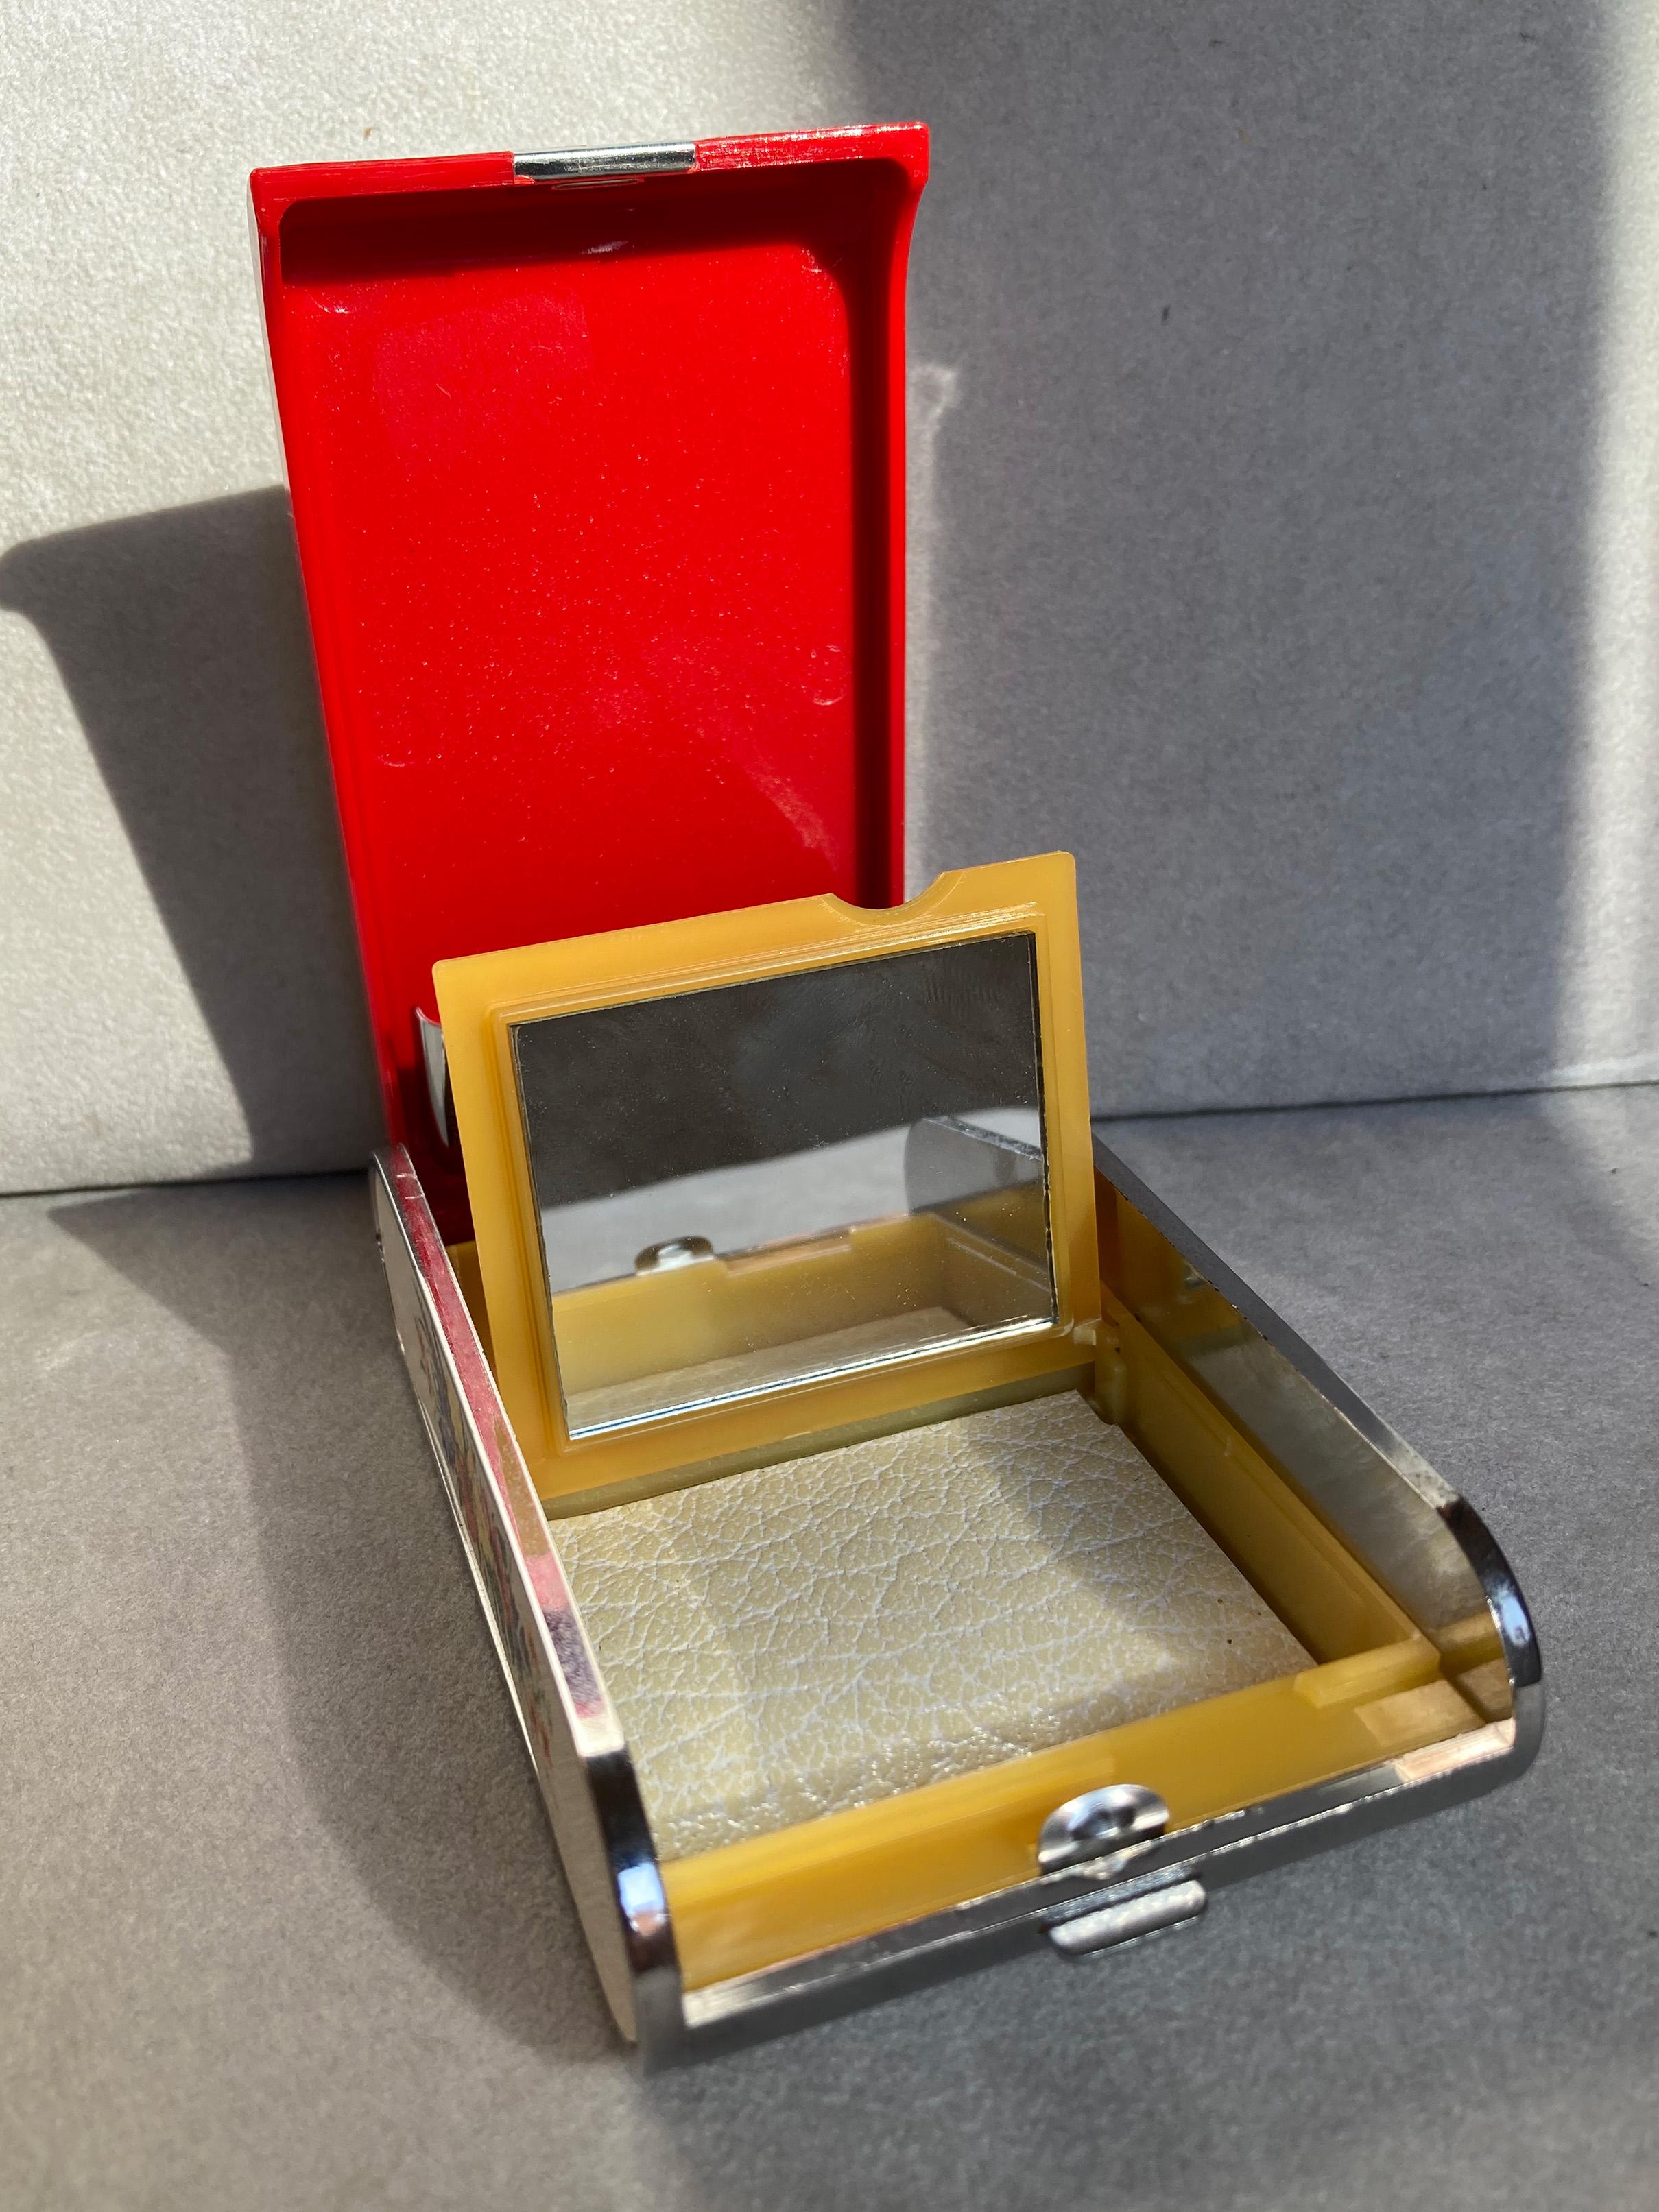 A Charming Musical Powder Compact and Cigarette Case made by Dandy-Mate Silvia in fabulous working condition. Circa: 1970's. Japan. Bitone plastic (red & white) and gold plated metal details.
Face powder container with small mirror.
Measures: 10,4